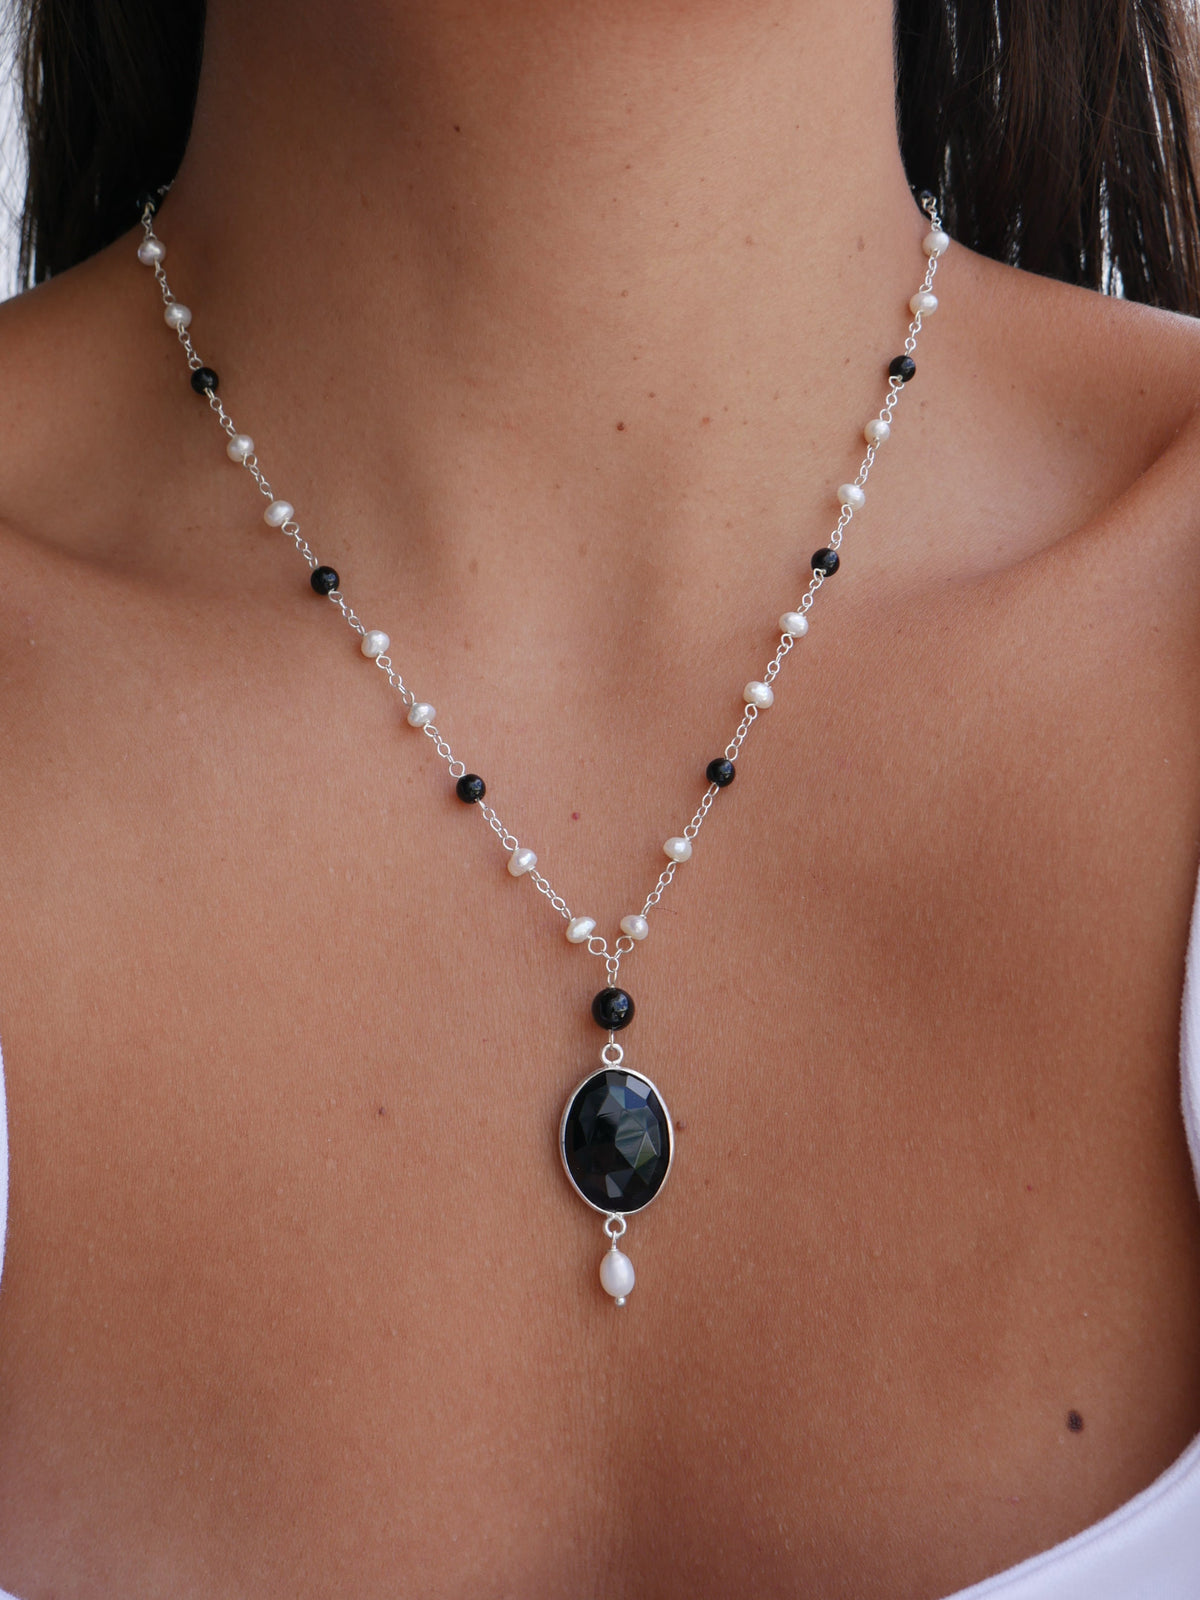 necklaces, jewelry, accessories, lariat necklaces, onyx necklaces, pearl necklaces, pearl jewelry, black jewelry, black accessories, nickel free jewelry, cool necklaces, cool jewelry, gift ideas, anniversary gift, wedding gift, graduation gift ideas , elegant jewelry, trending on tiktok and instagram, fine jewelry, pearl necklaces, .925 sterling silver, kesley boutique, statement necklaces, necklaces that wont turn green with water, anti tarnish jewelry